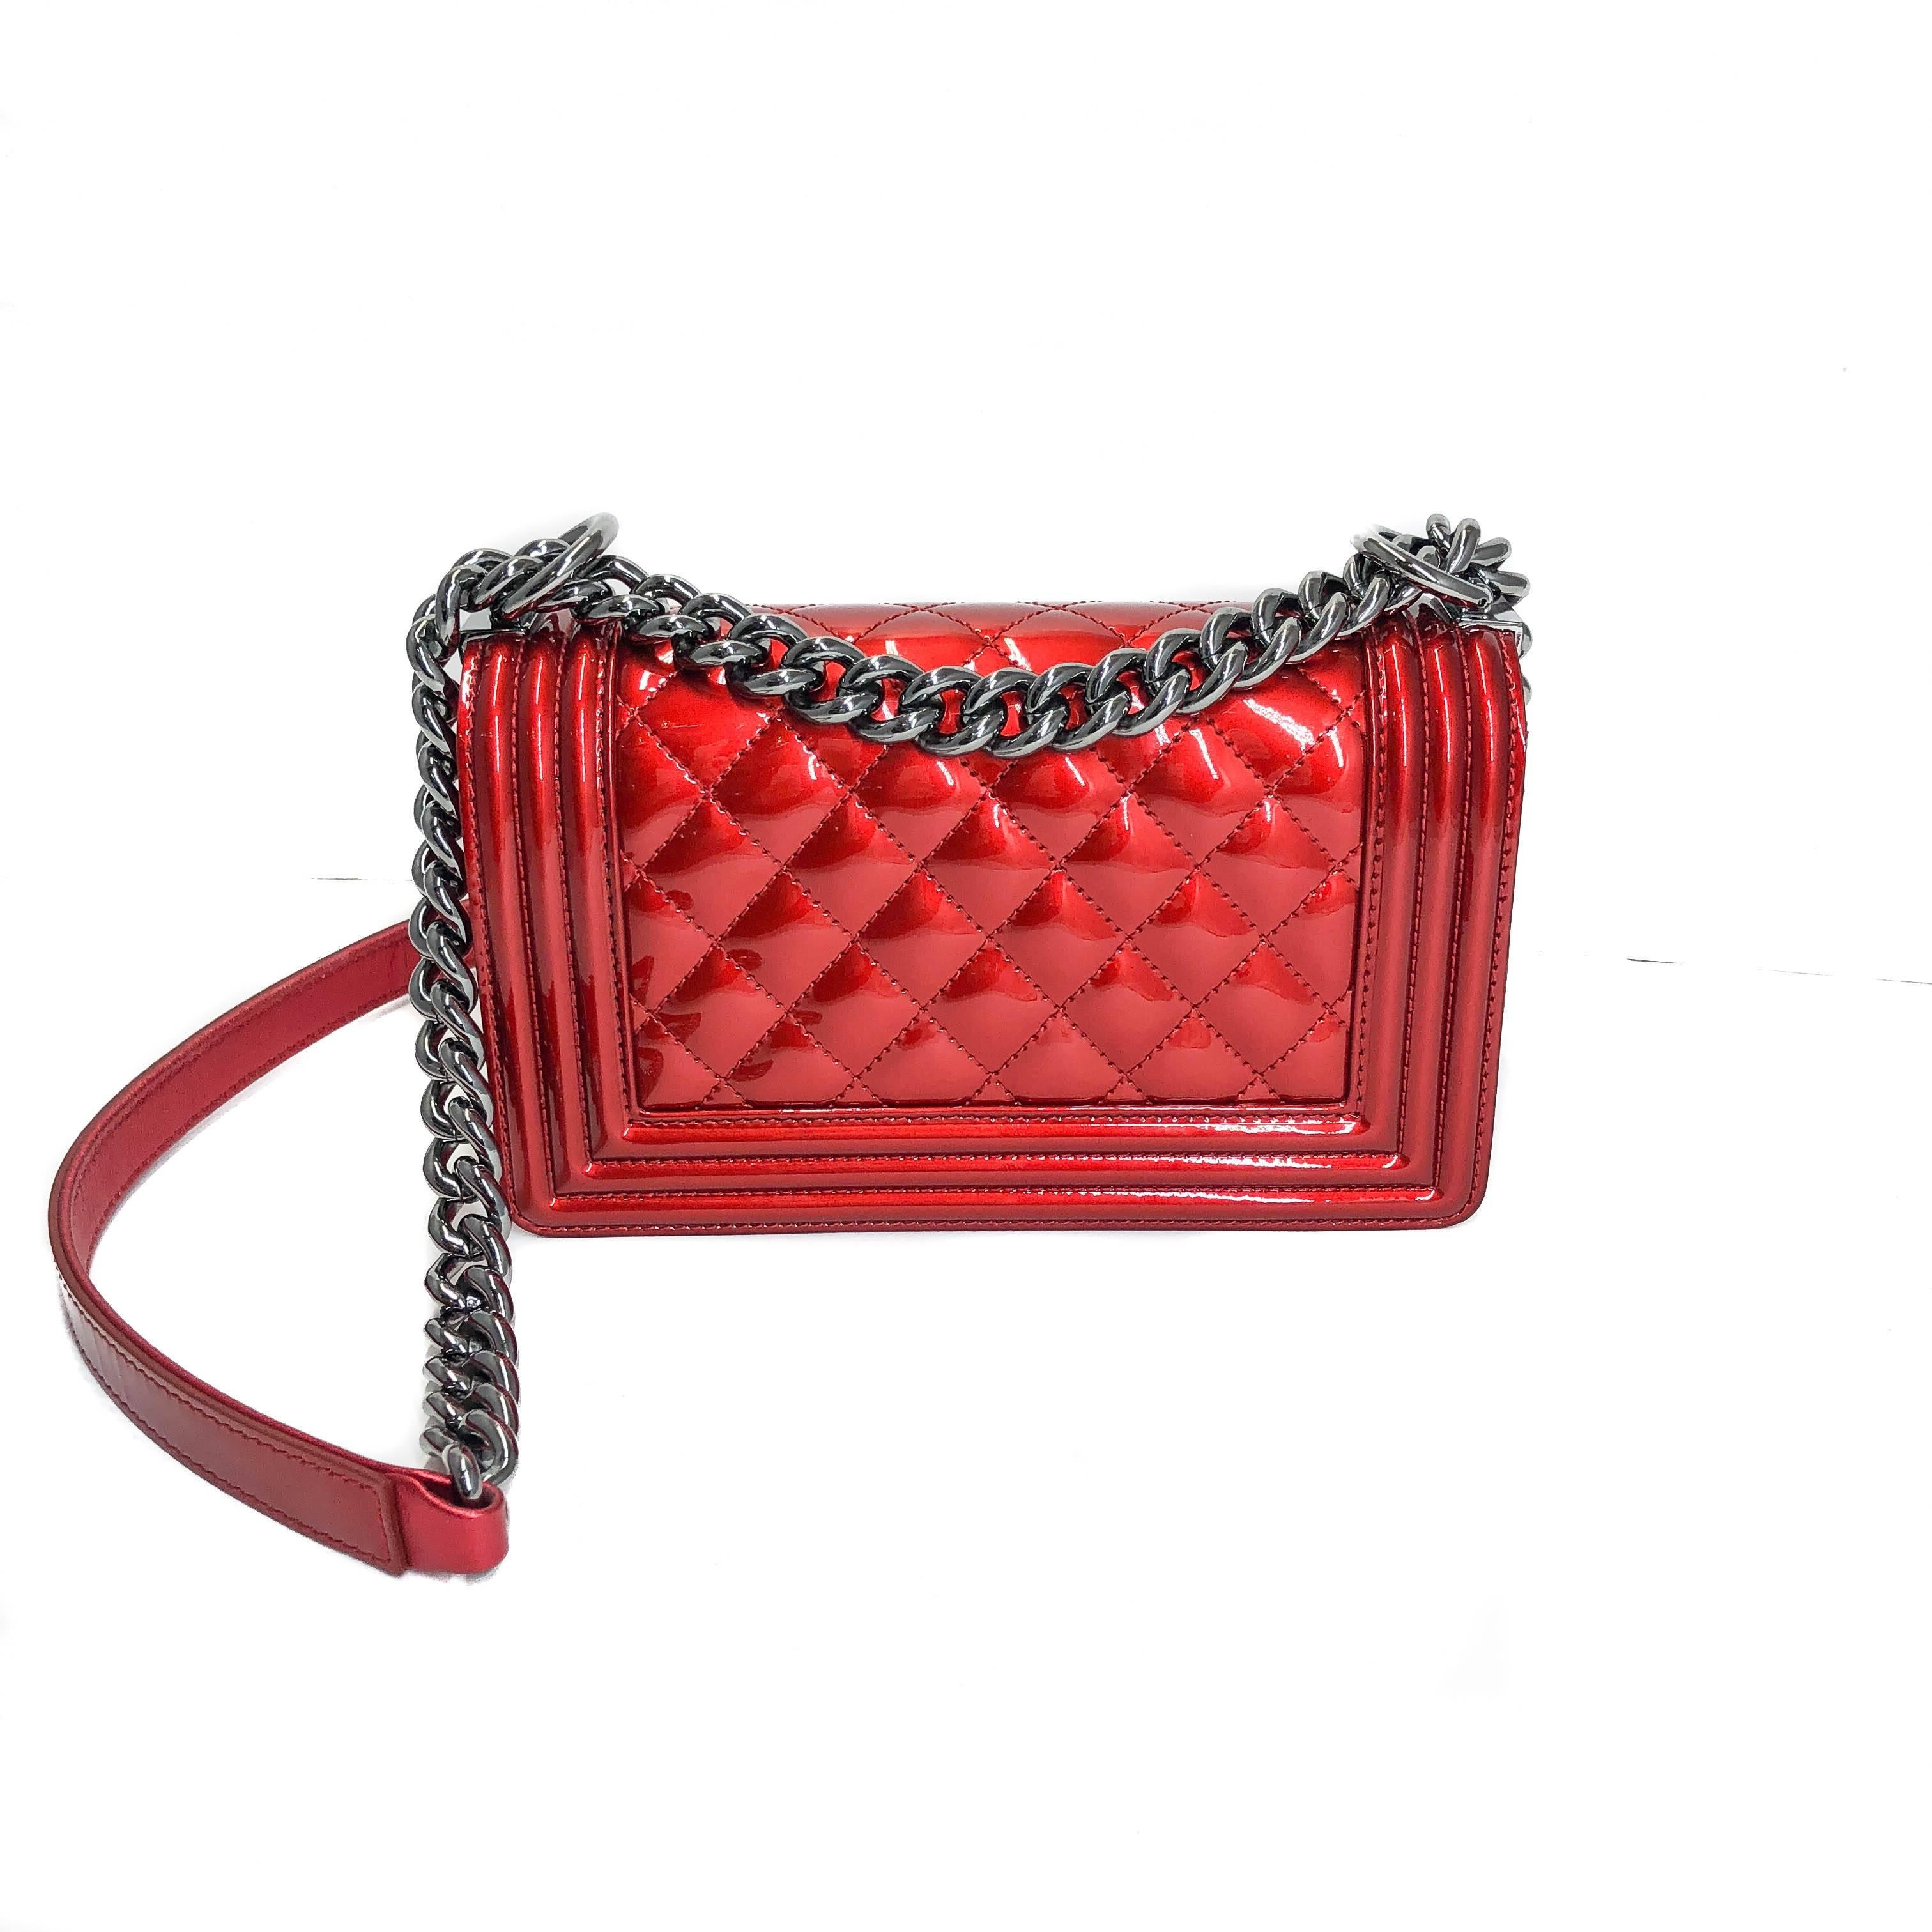 This stylish Small Red Patent Boy Bag is sure to make you stand out in a crowd. Join the ranks of fashion royalty by dressing up your everyday essentials in a Chanel Boy Bag. The interior features one flat pocket for those items you want to keep